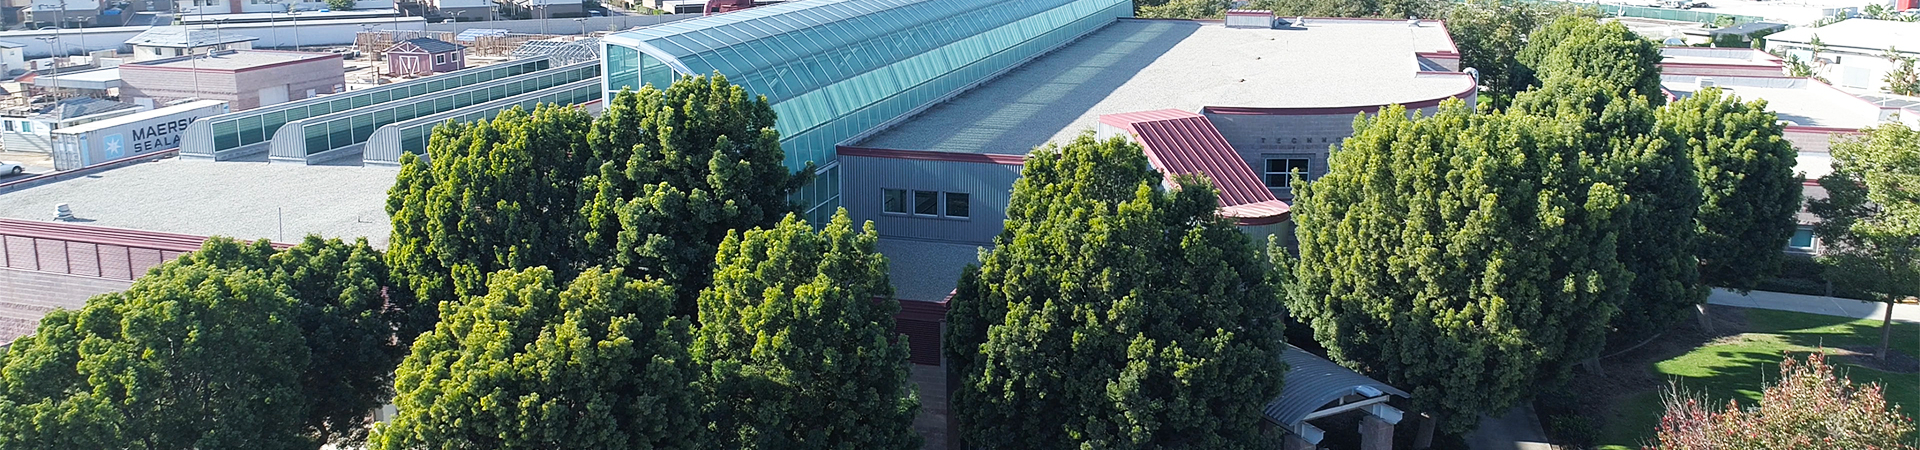 Aerial view of the Technology Center building